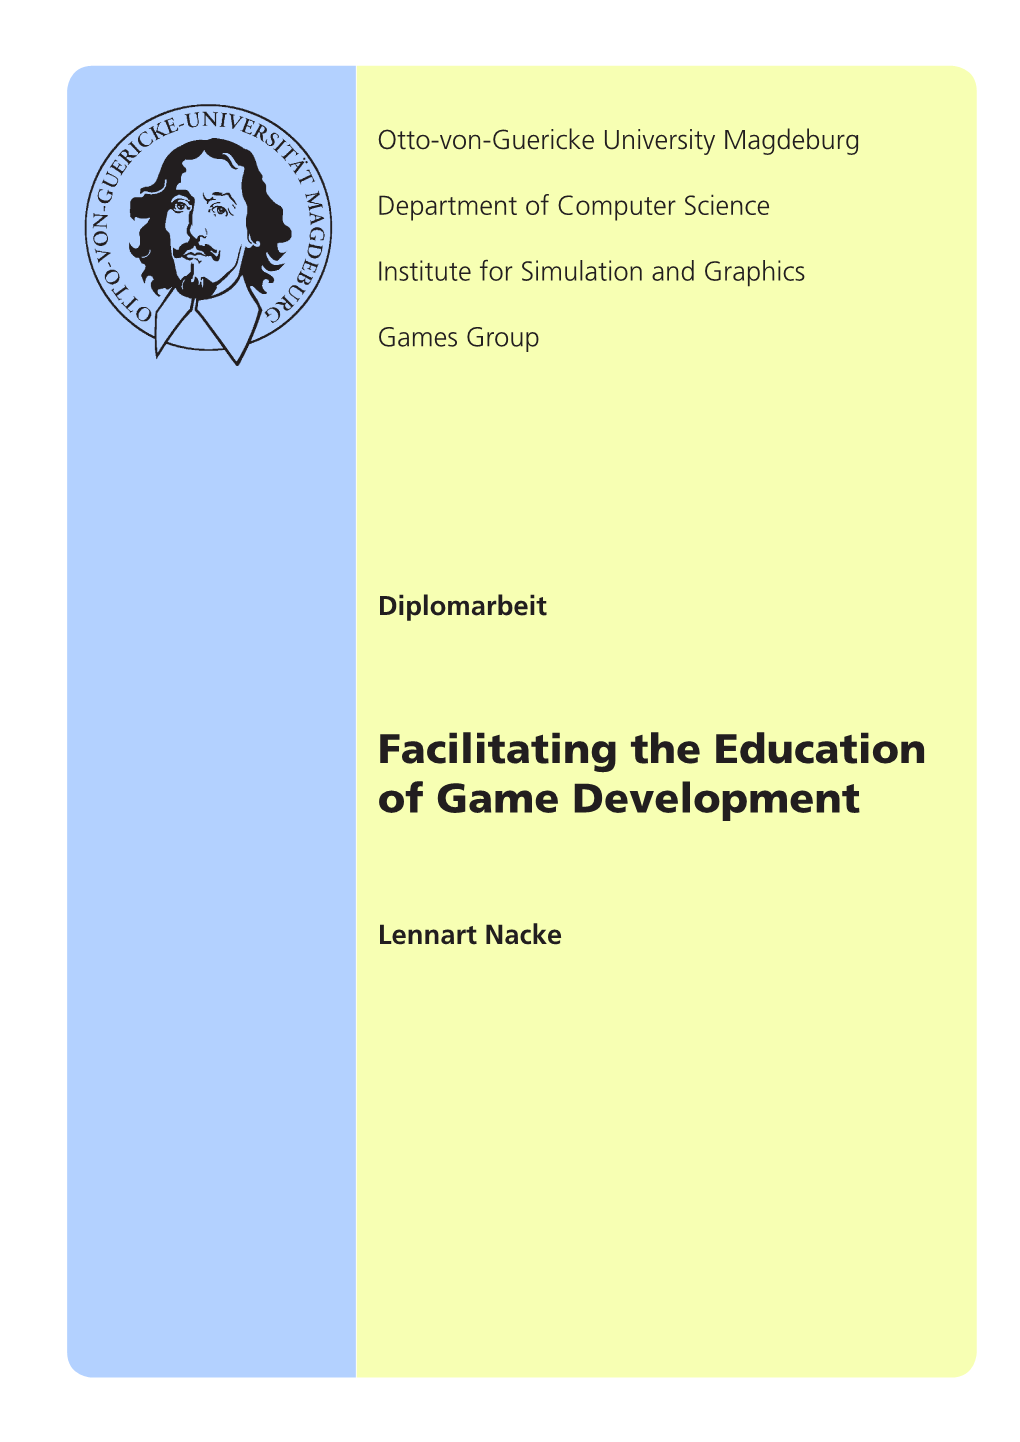 Facilitating the Education of Game Development